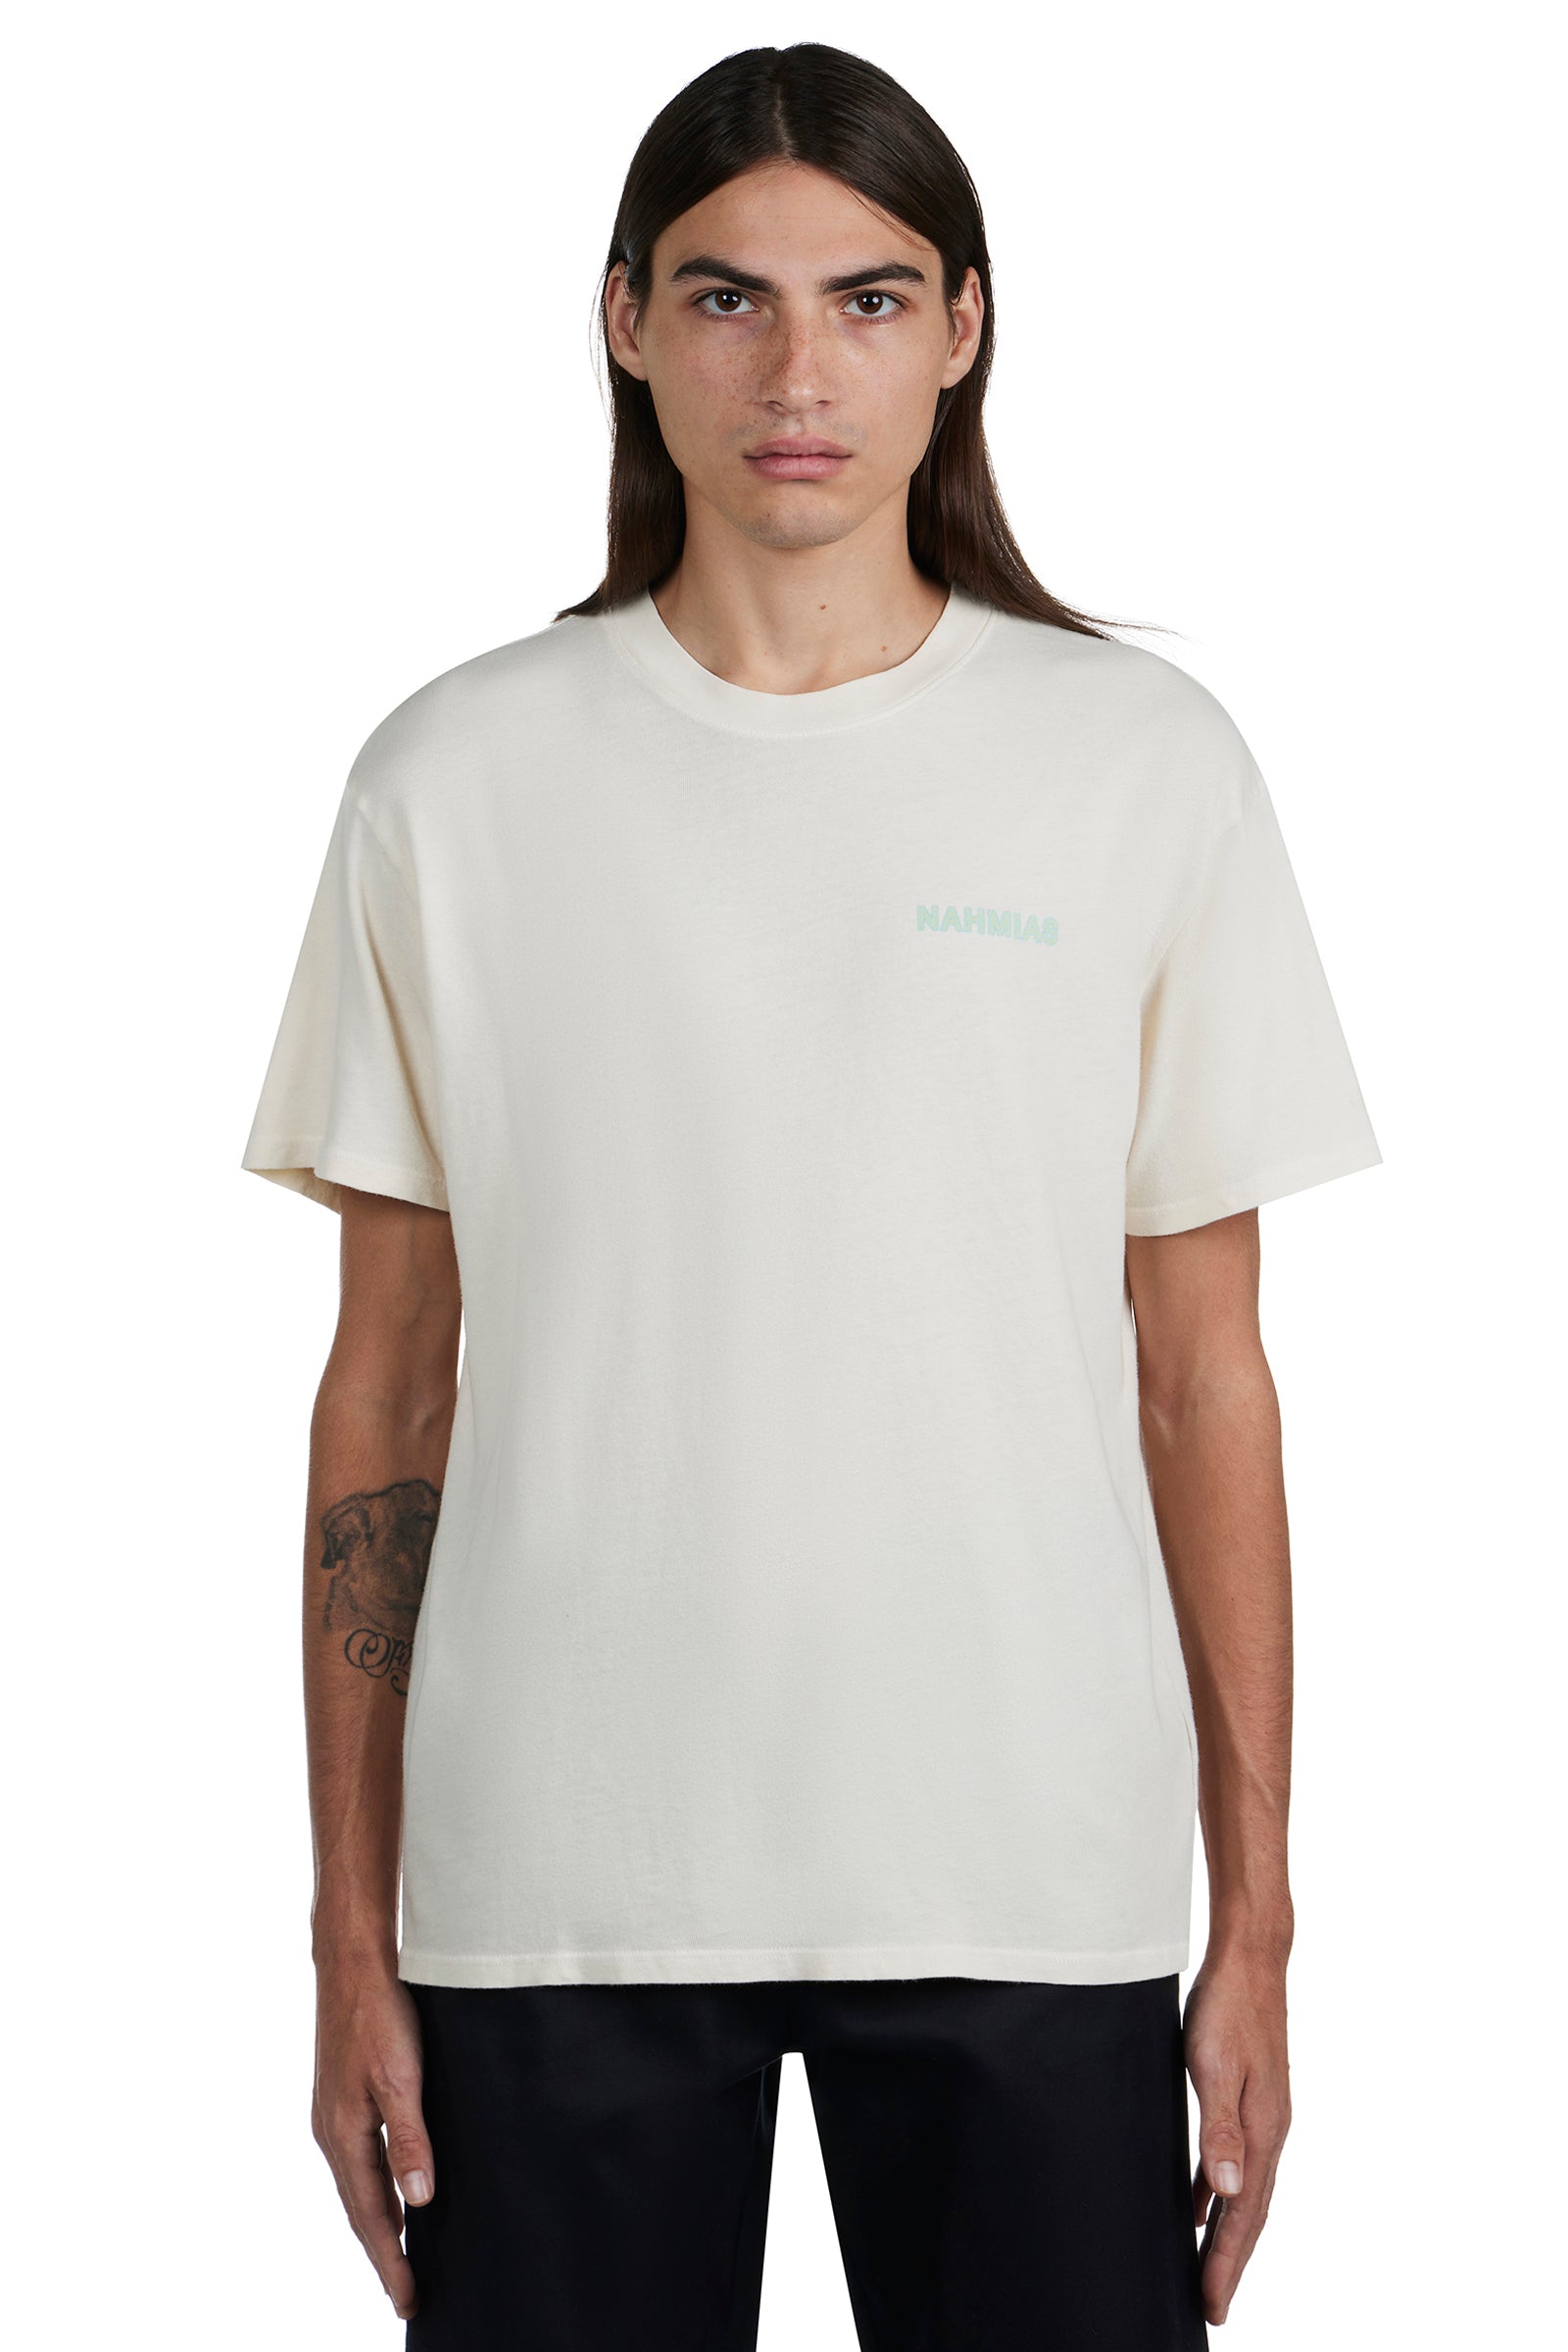 Queen of the Coast T-shirt